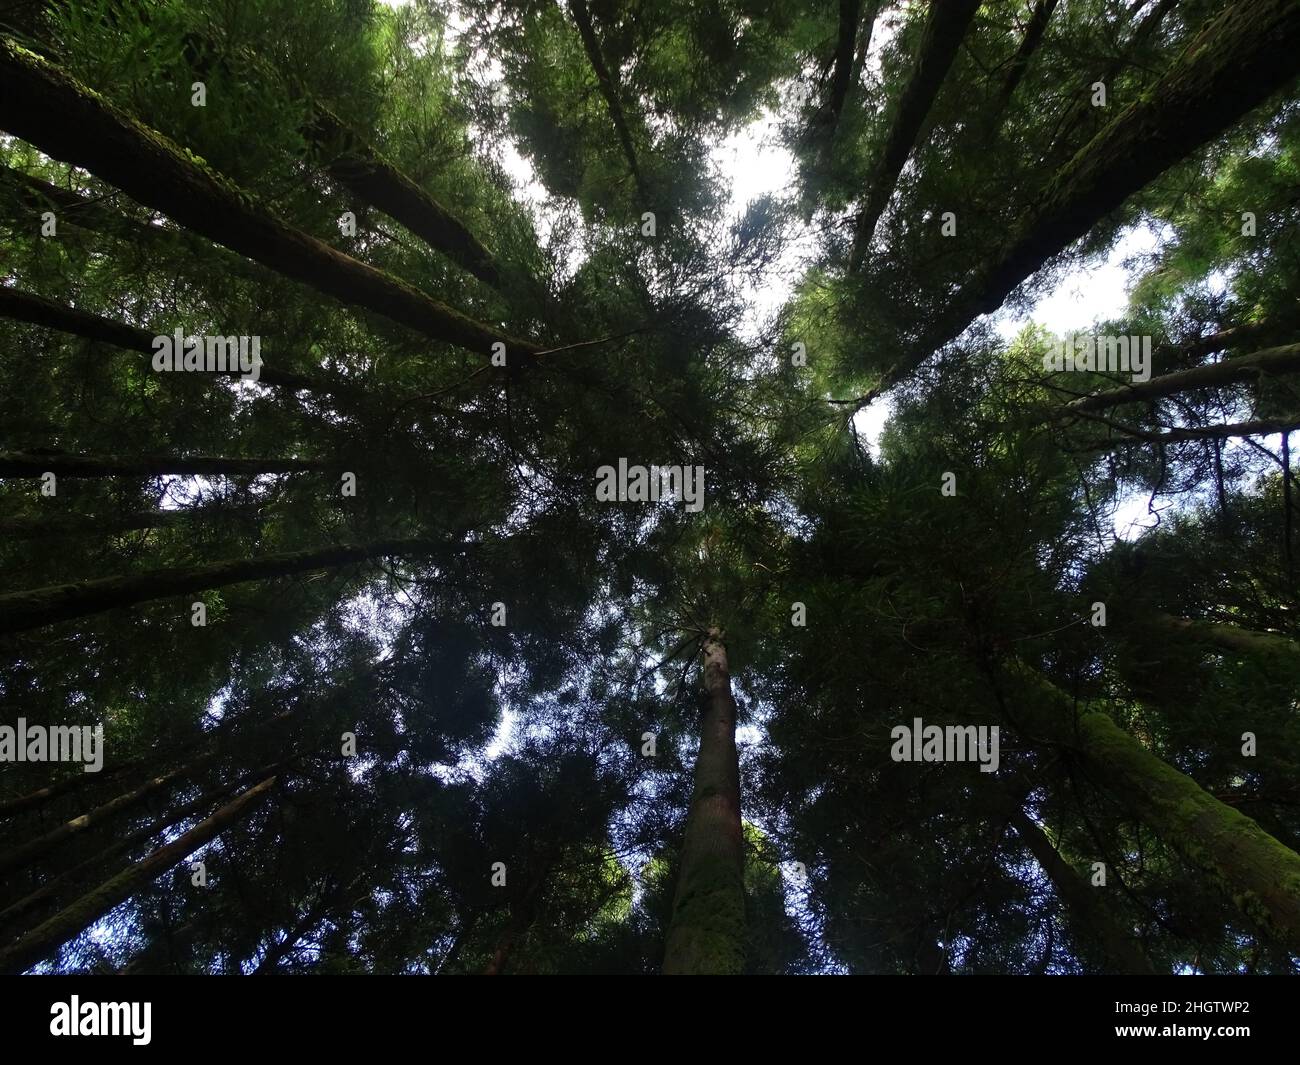 Japanese cedar, view from bottom to top, sky in background. Stock Photo